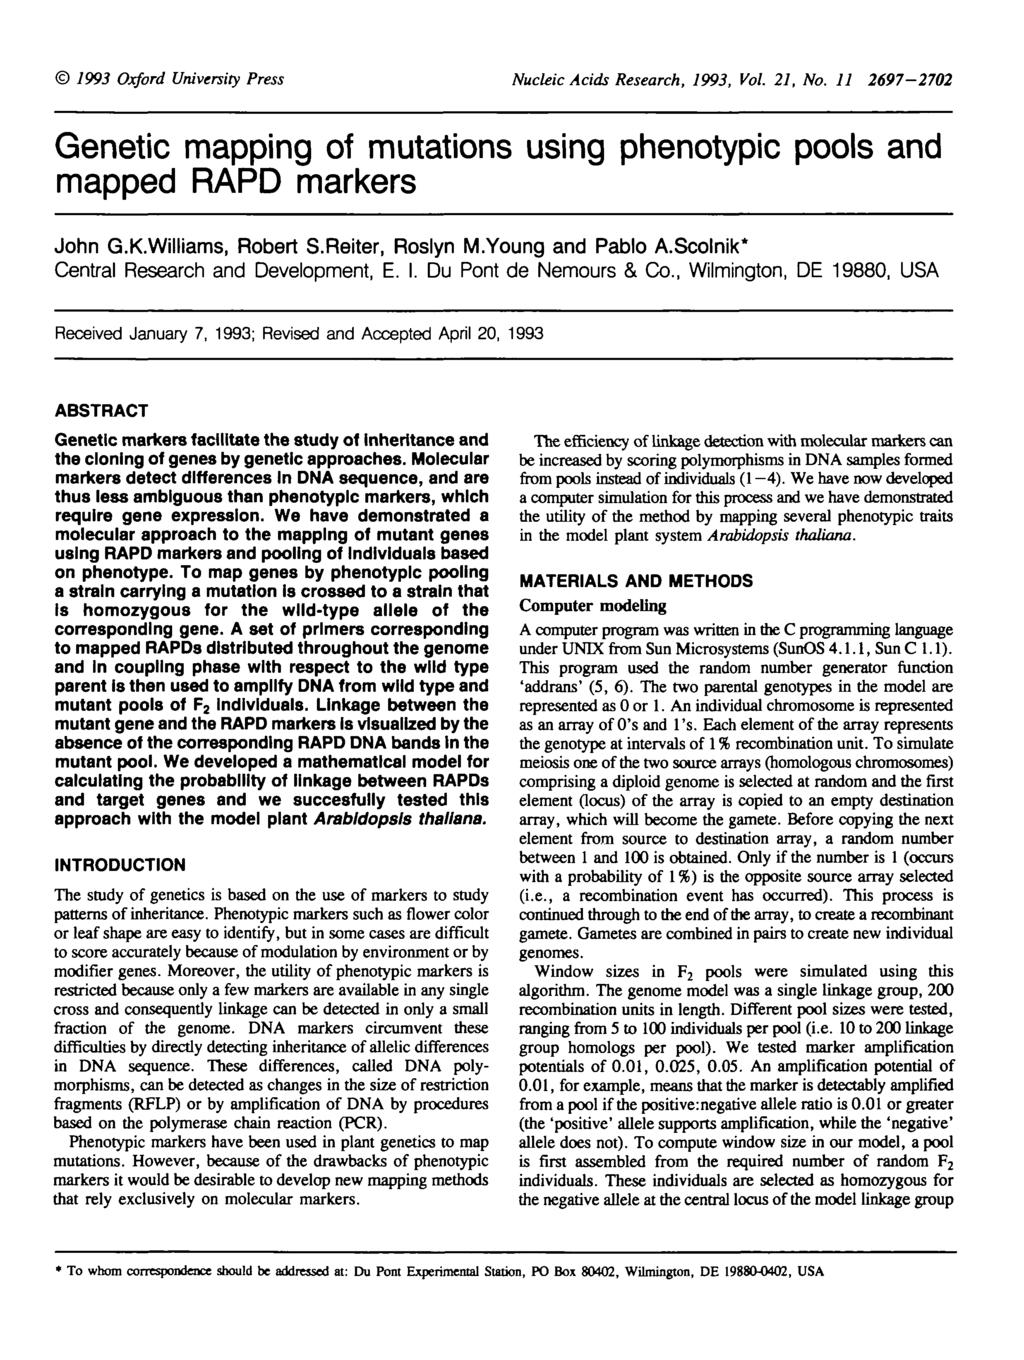 1993 Oxford University Press Nucleic Acids Research, 1993, Vol. 21, No. 11 2697-2702 Genetic mapping of mutations using phenotypic pools and mapped RAPD markers John G.K.Williams, Robert S.